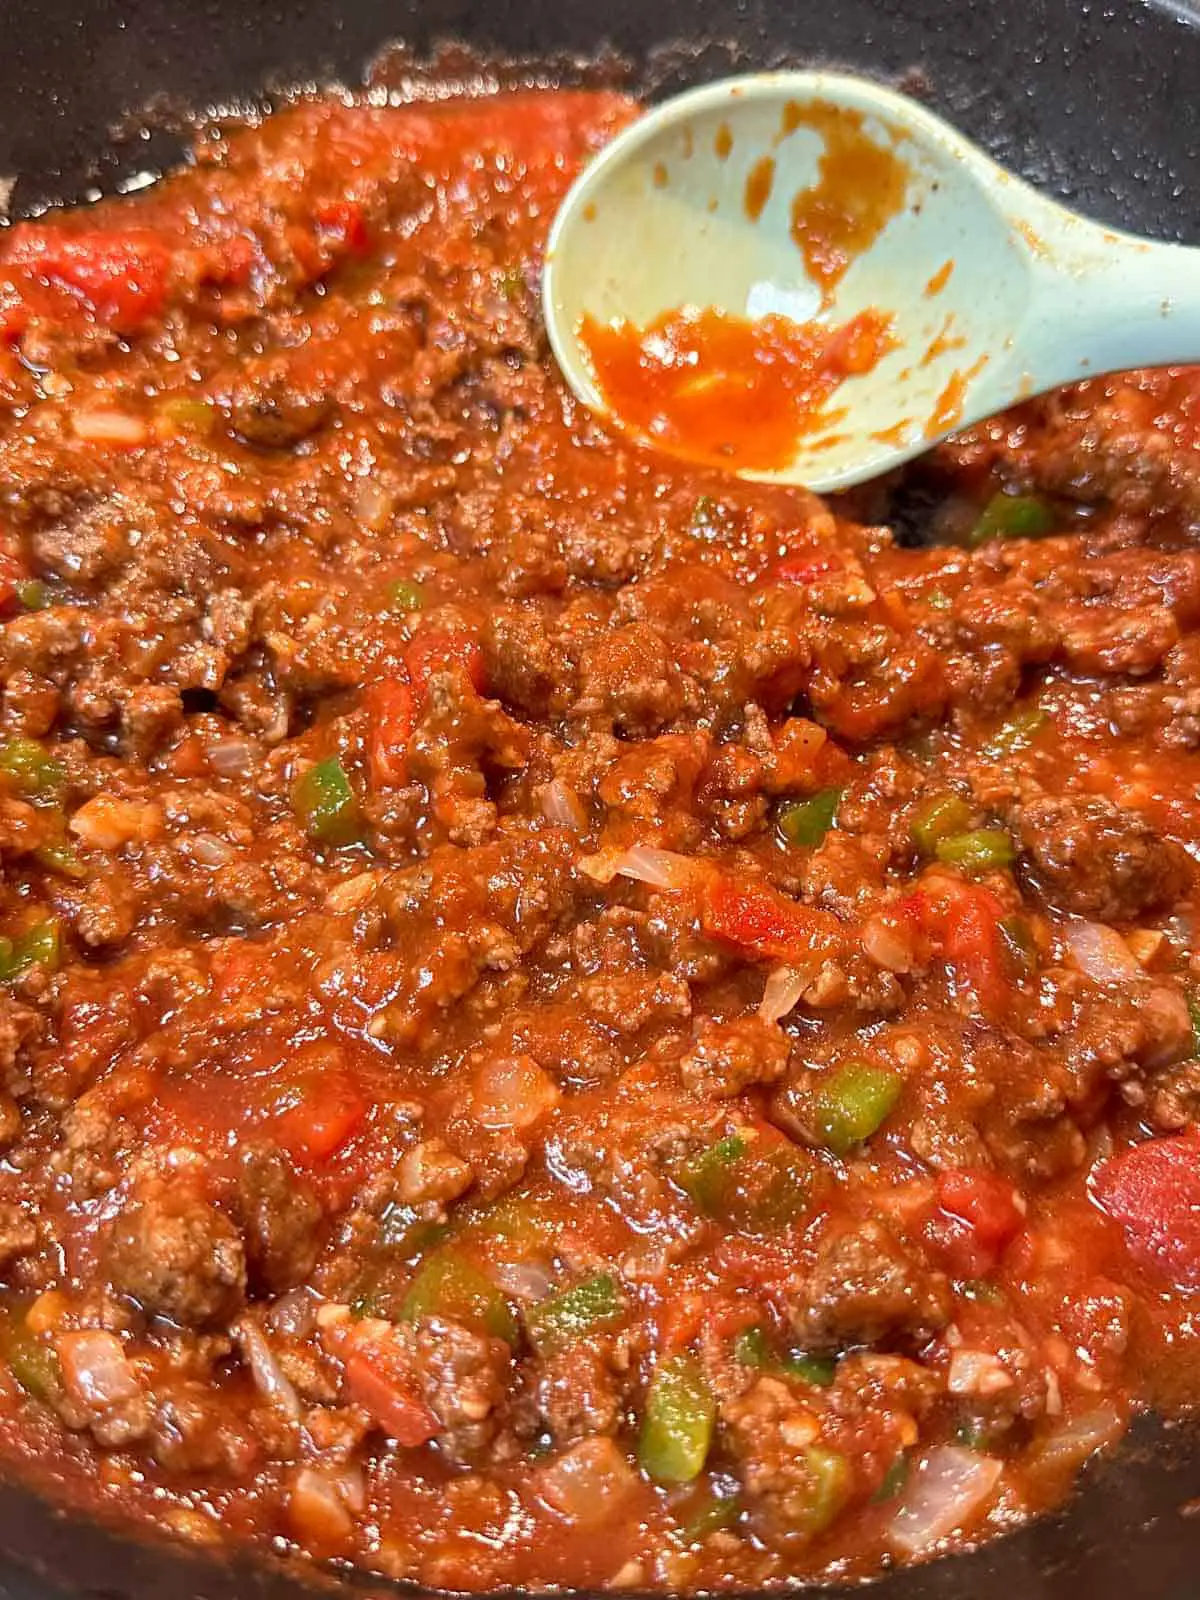 Sloppy joe sauce including beef, tomatoes, and green bell peppers in a skillet with a blue spoon resting in the skillet.